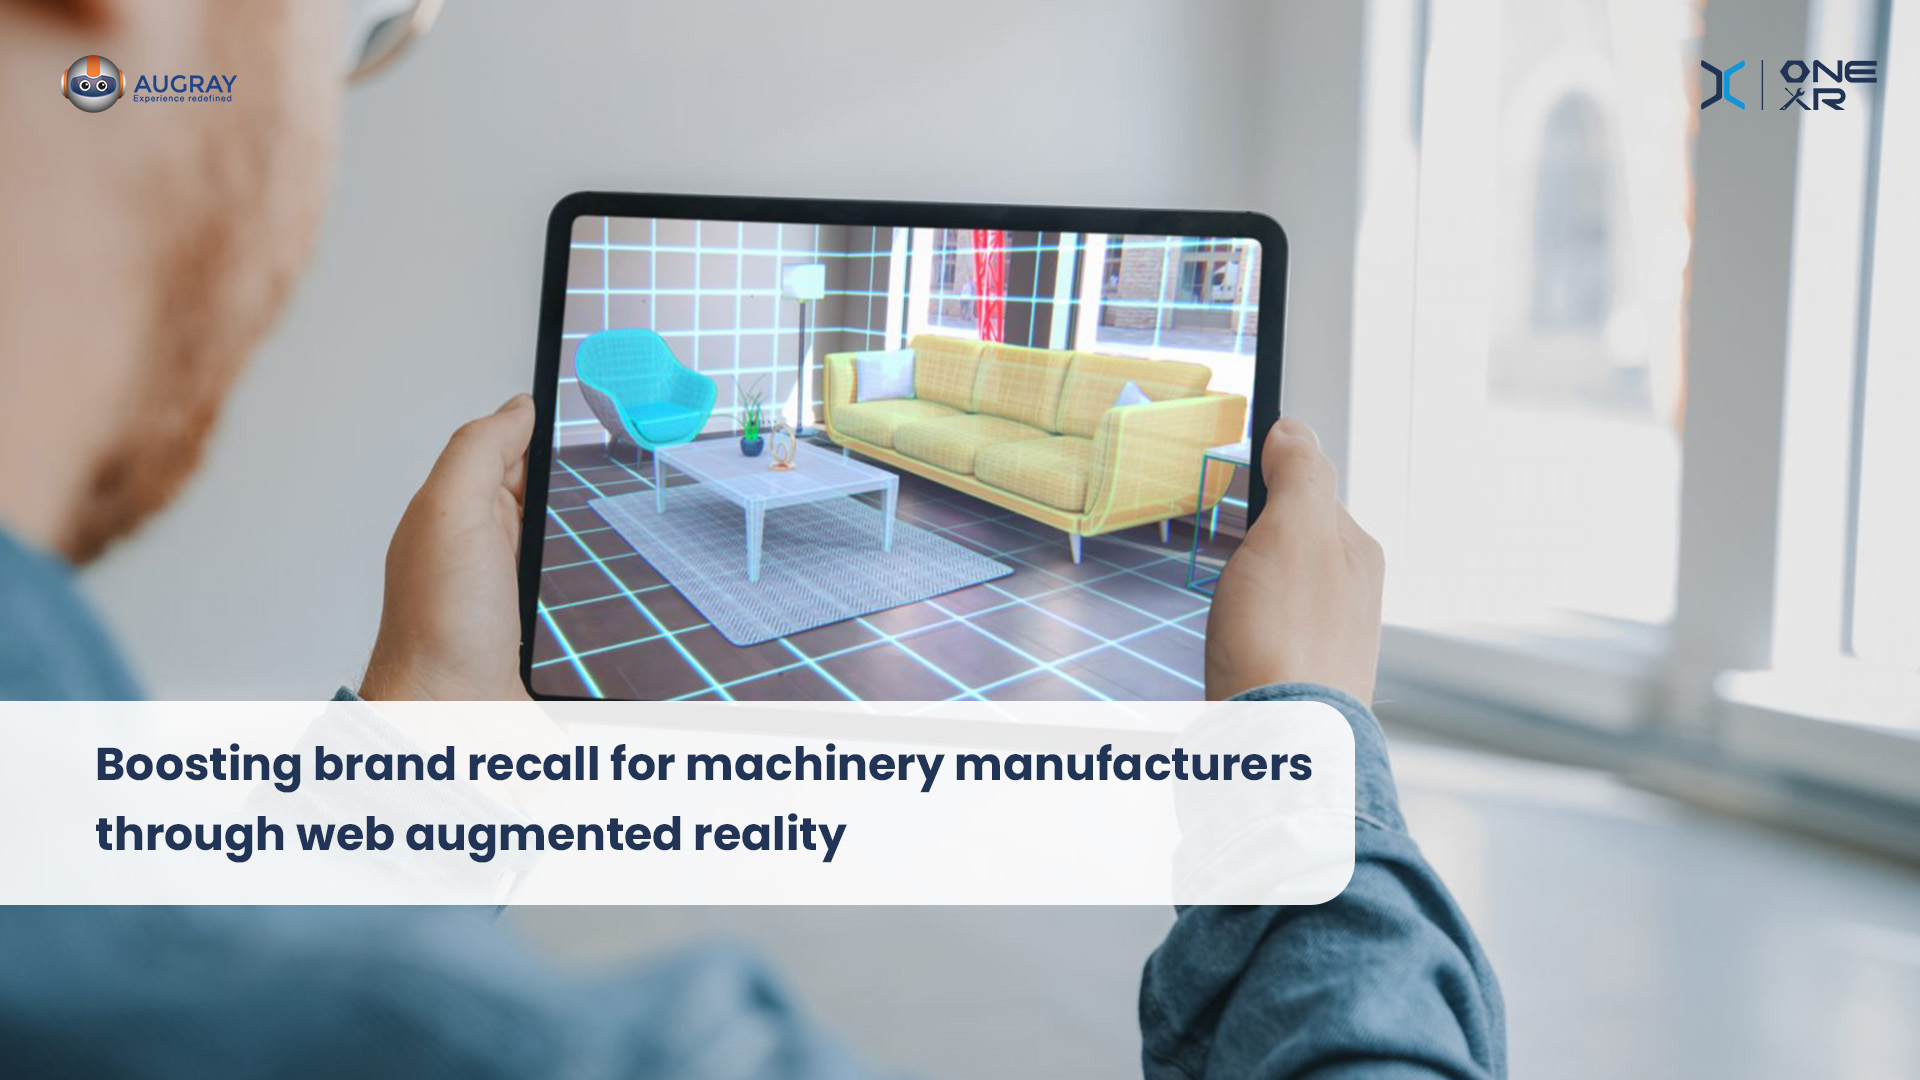 Boosting brand recall for machinery manufacturers through web augmented reality - Augray Blog